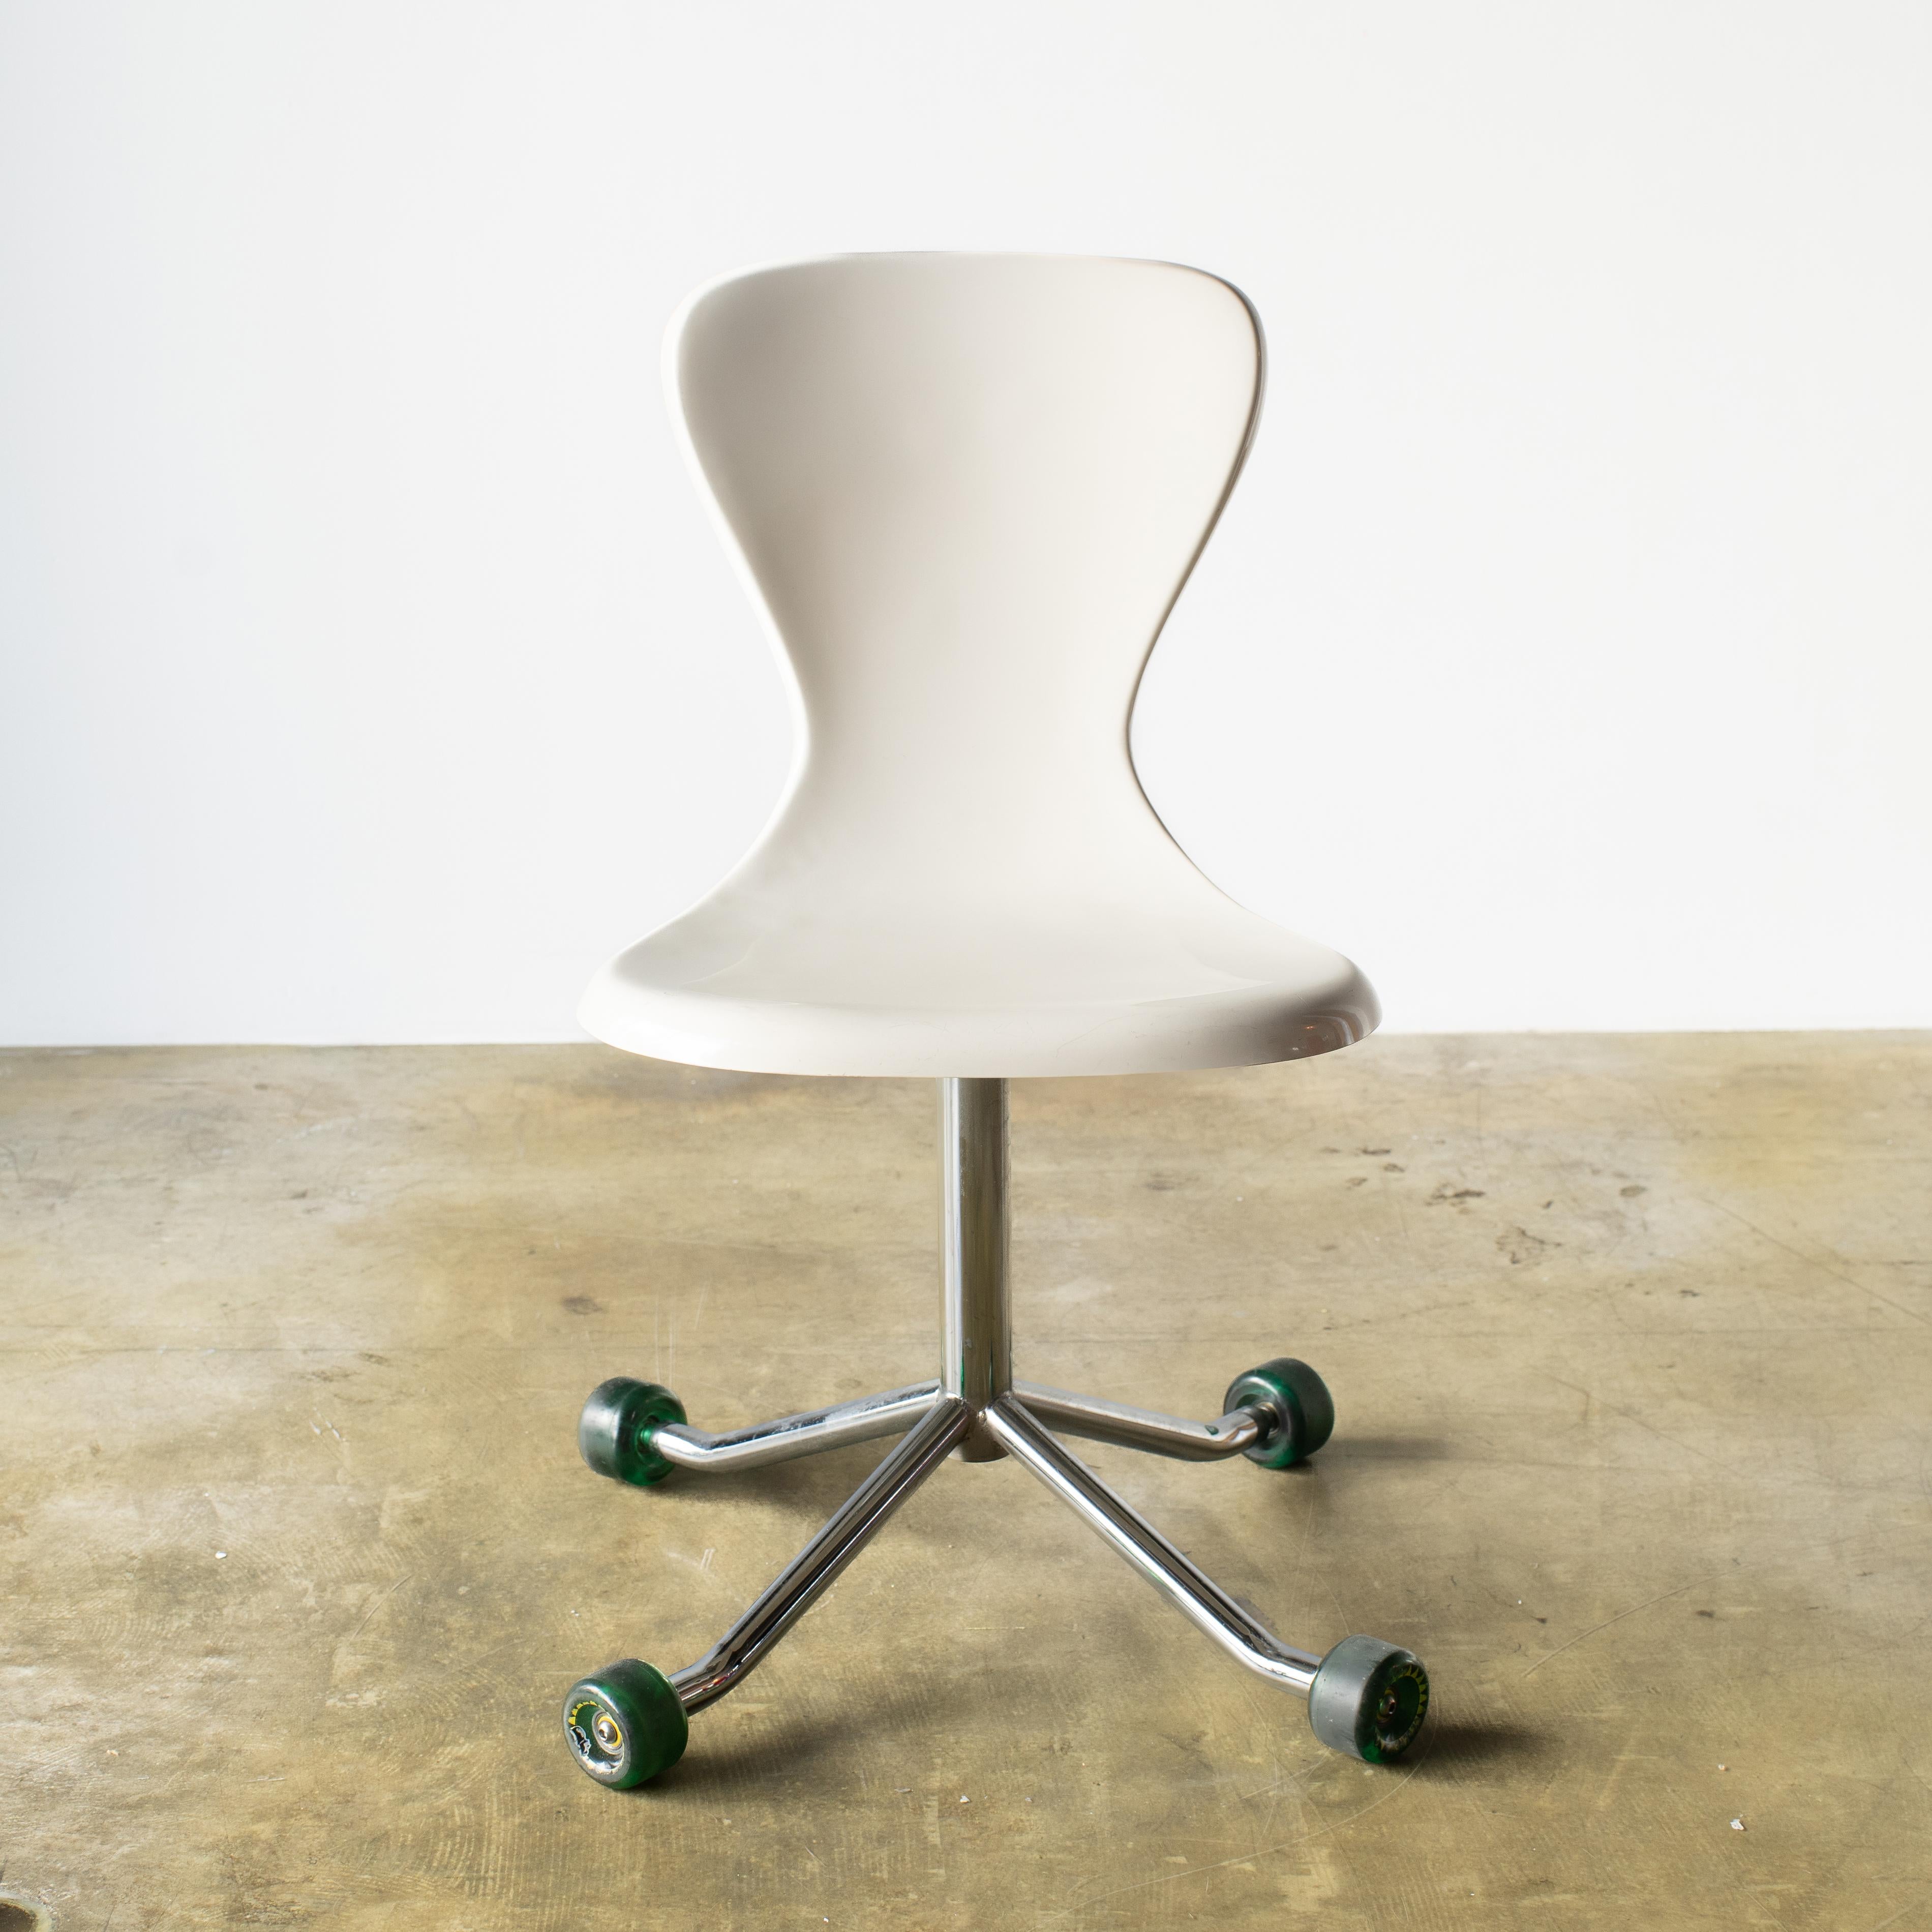 Swivel desk chair with skateboard wheels.  it's a funny chair which can rotate around by four wheels.  
It's the style in Y2K interior and design. Also really great example in that era. 
 